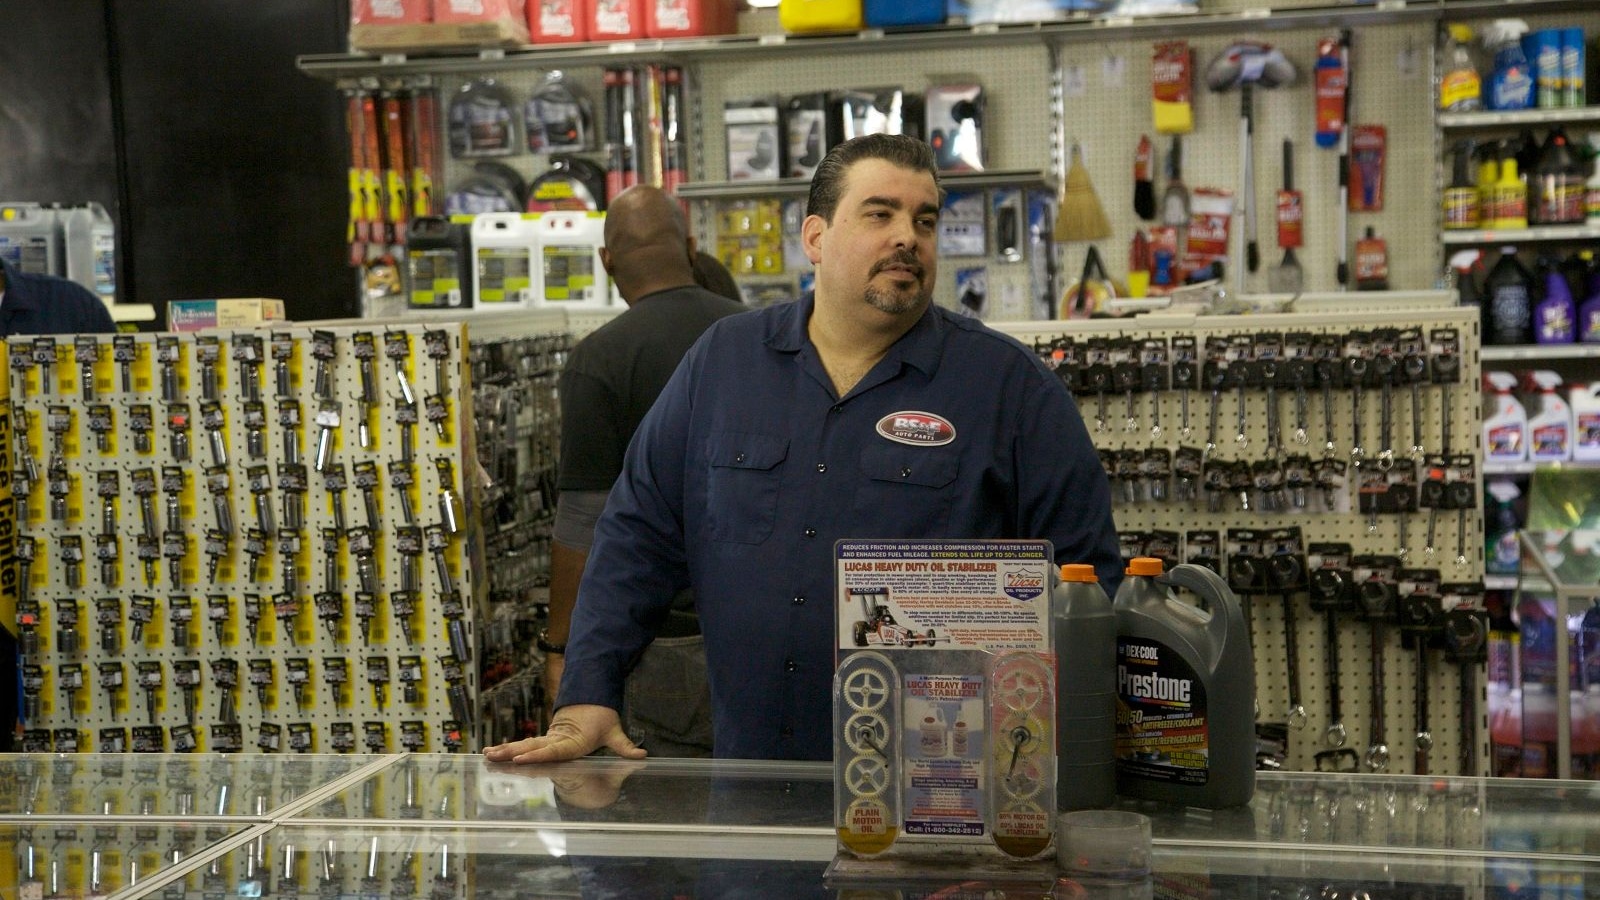 Joe Ferrer, owner of BS&F Auto Parts in the Bronx, New York